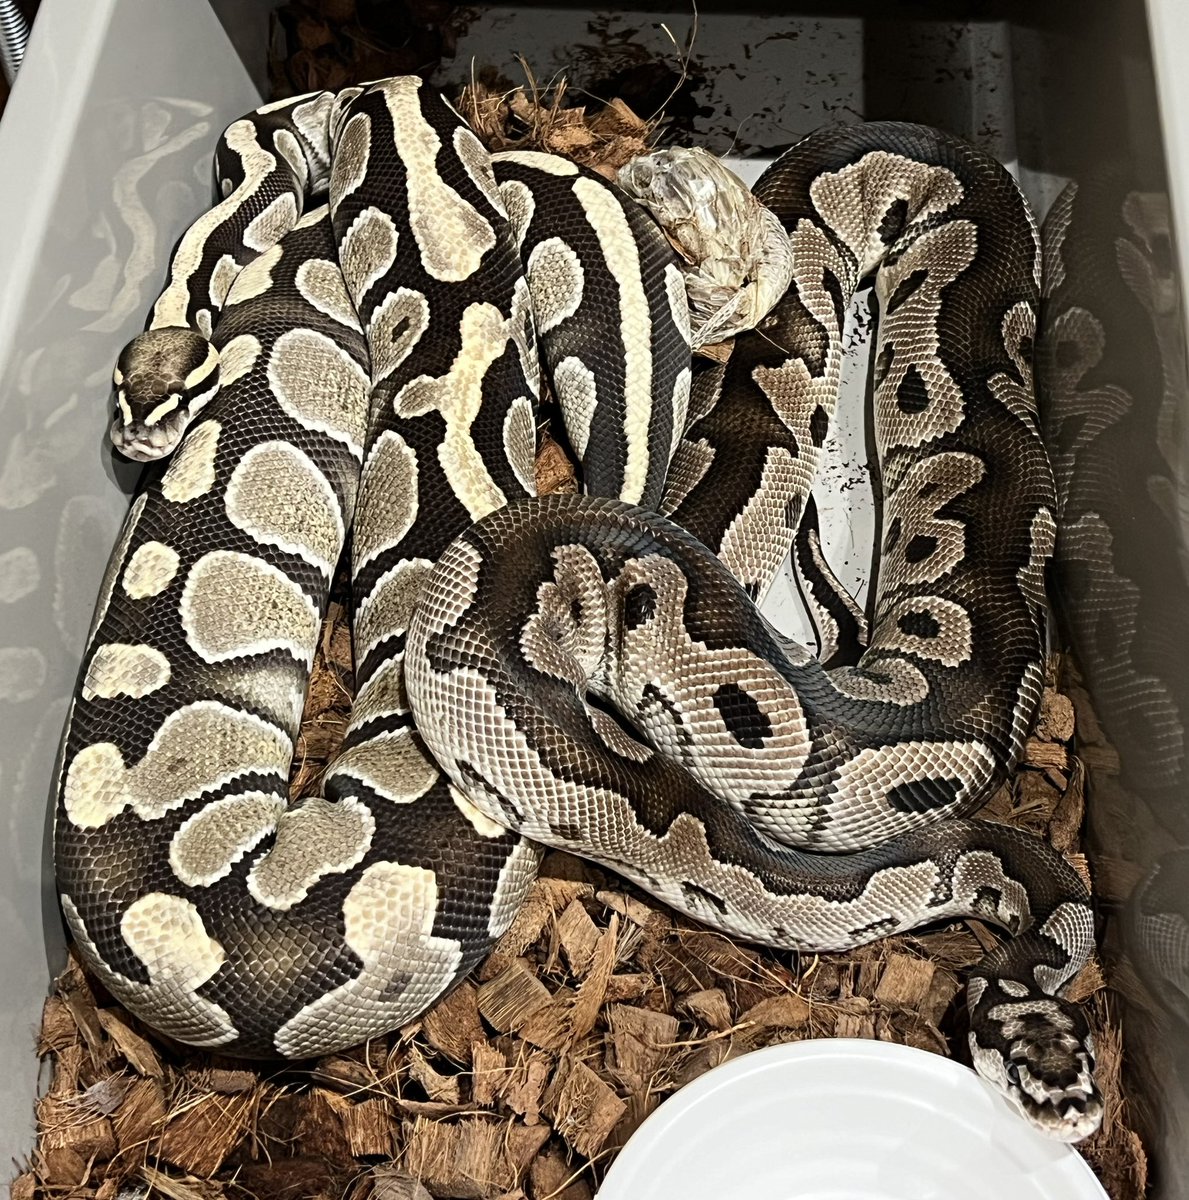 I checked several times 

I don't think the compatibility is bad🙄 

#ballpython #ballpythons #ballpythonclown #ballpythonmorph #ballpythonmorphs #ballpythonbreeder #ballpythonbreeding #clownproject #ボールパイソン